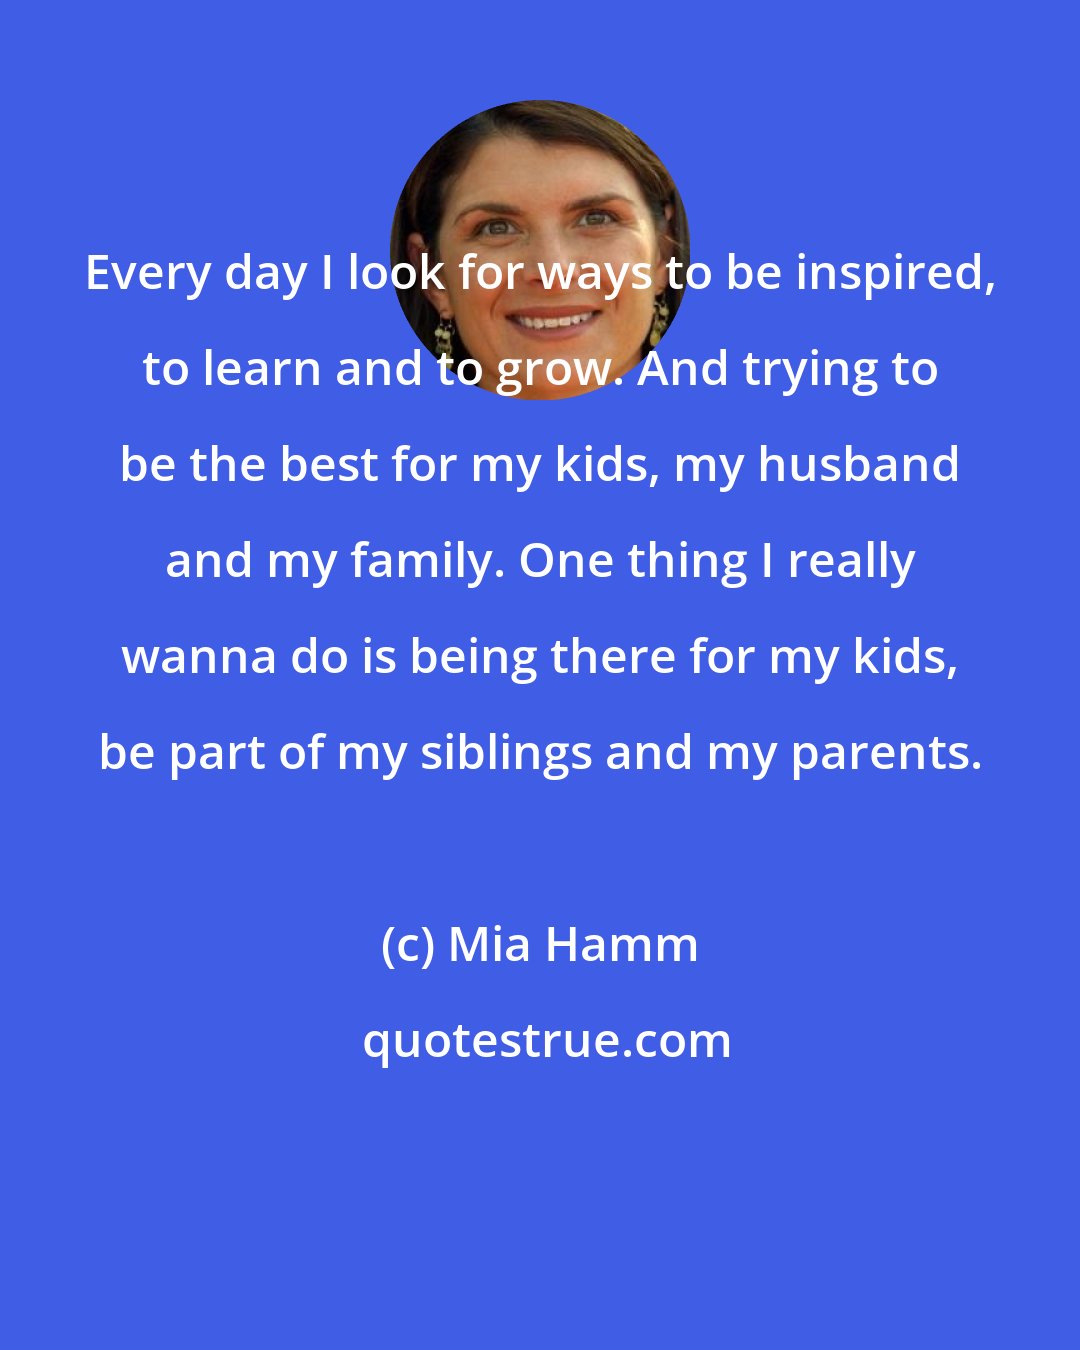 Mia Hamm: Every day I look for ways to be inspired, to learn and to grow. And trying to be the best for my kids, my husband and my family. One thing I really wanna do is being there for my kids, be part of my siblings and my parents.